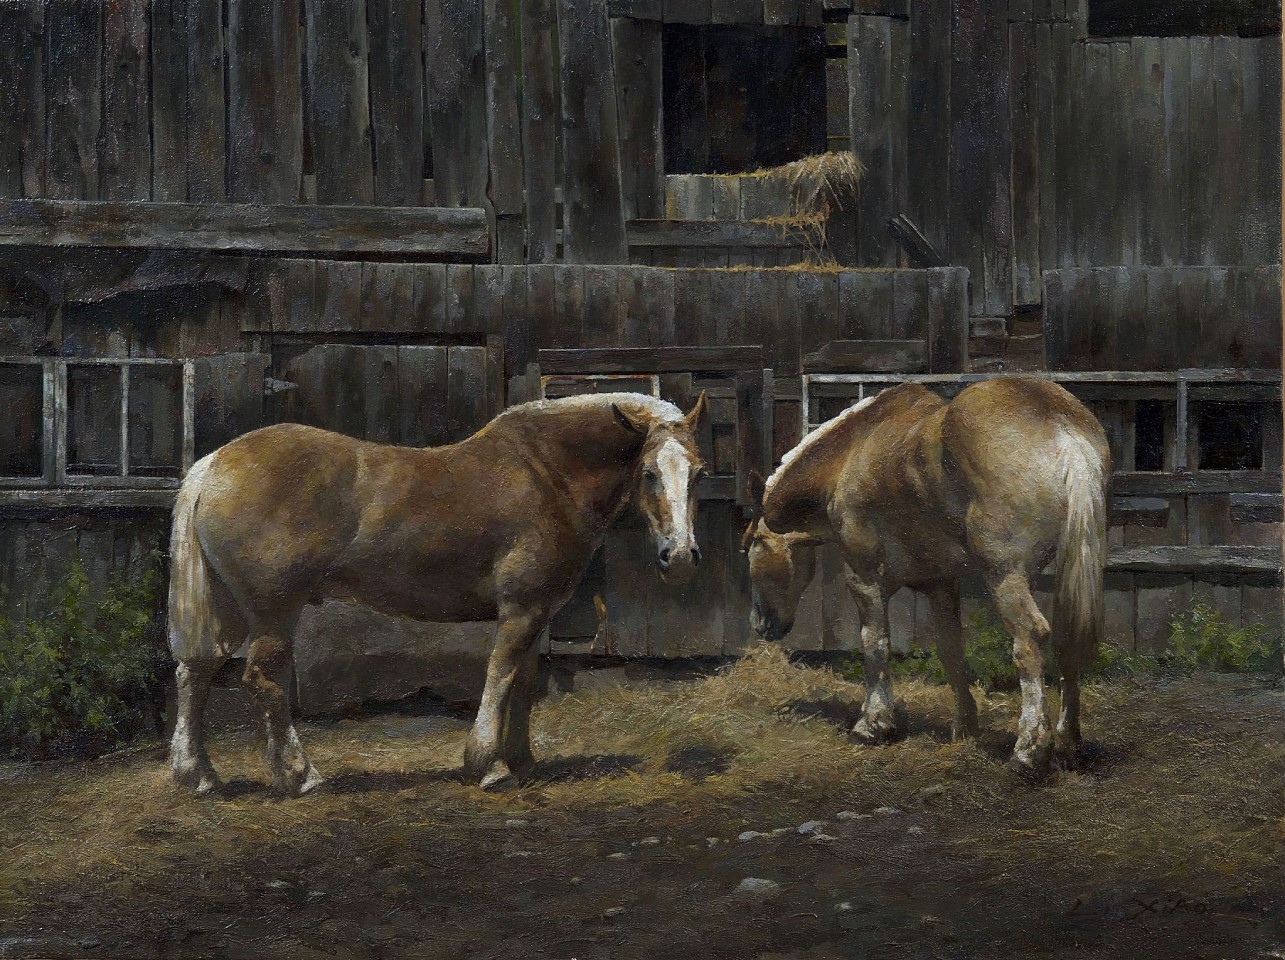 Li Xiao, Stable, 2021
oil on canvas, 18 x 24 in. (45.7 x 61 cm)
LX210604